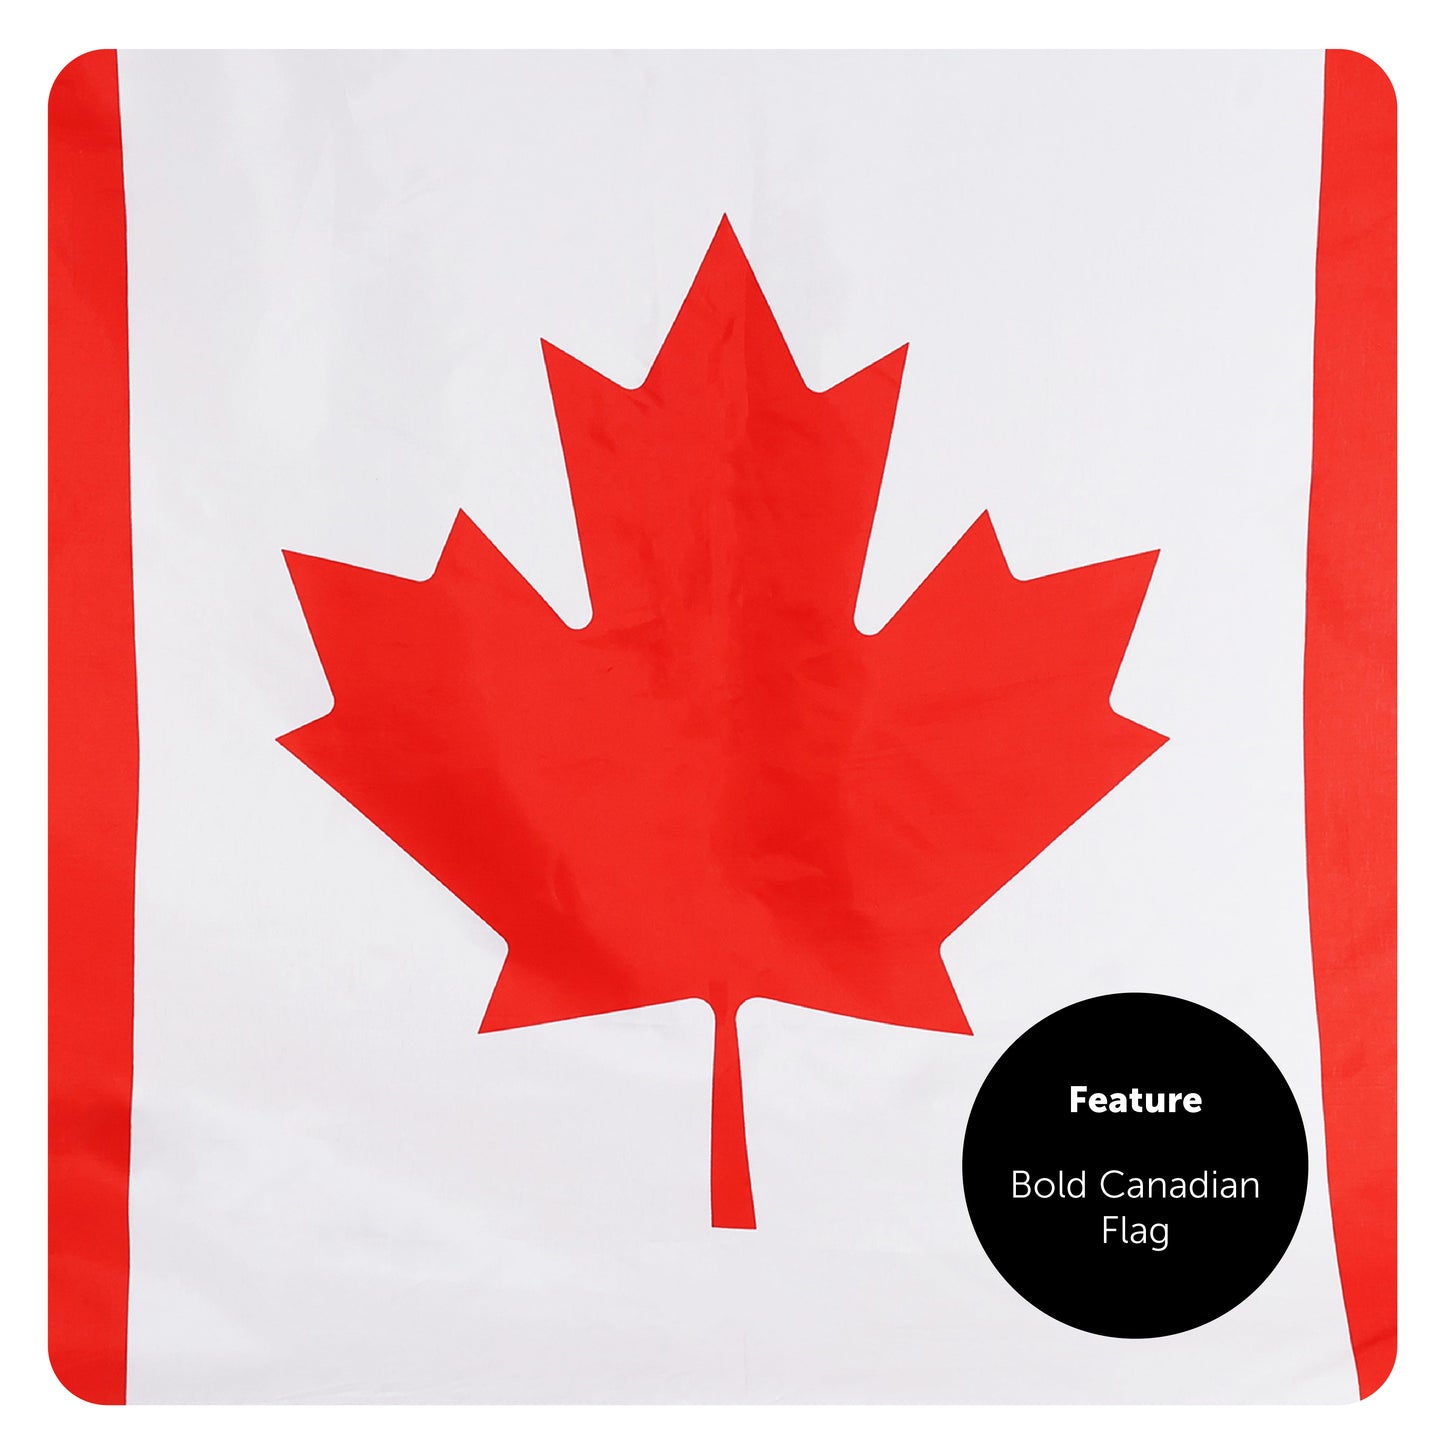 Canada 5ft x 3ft Flag with 2 Eyelets